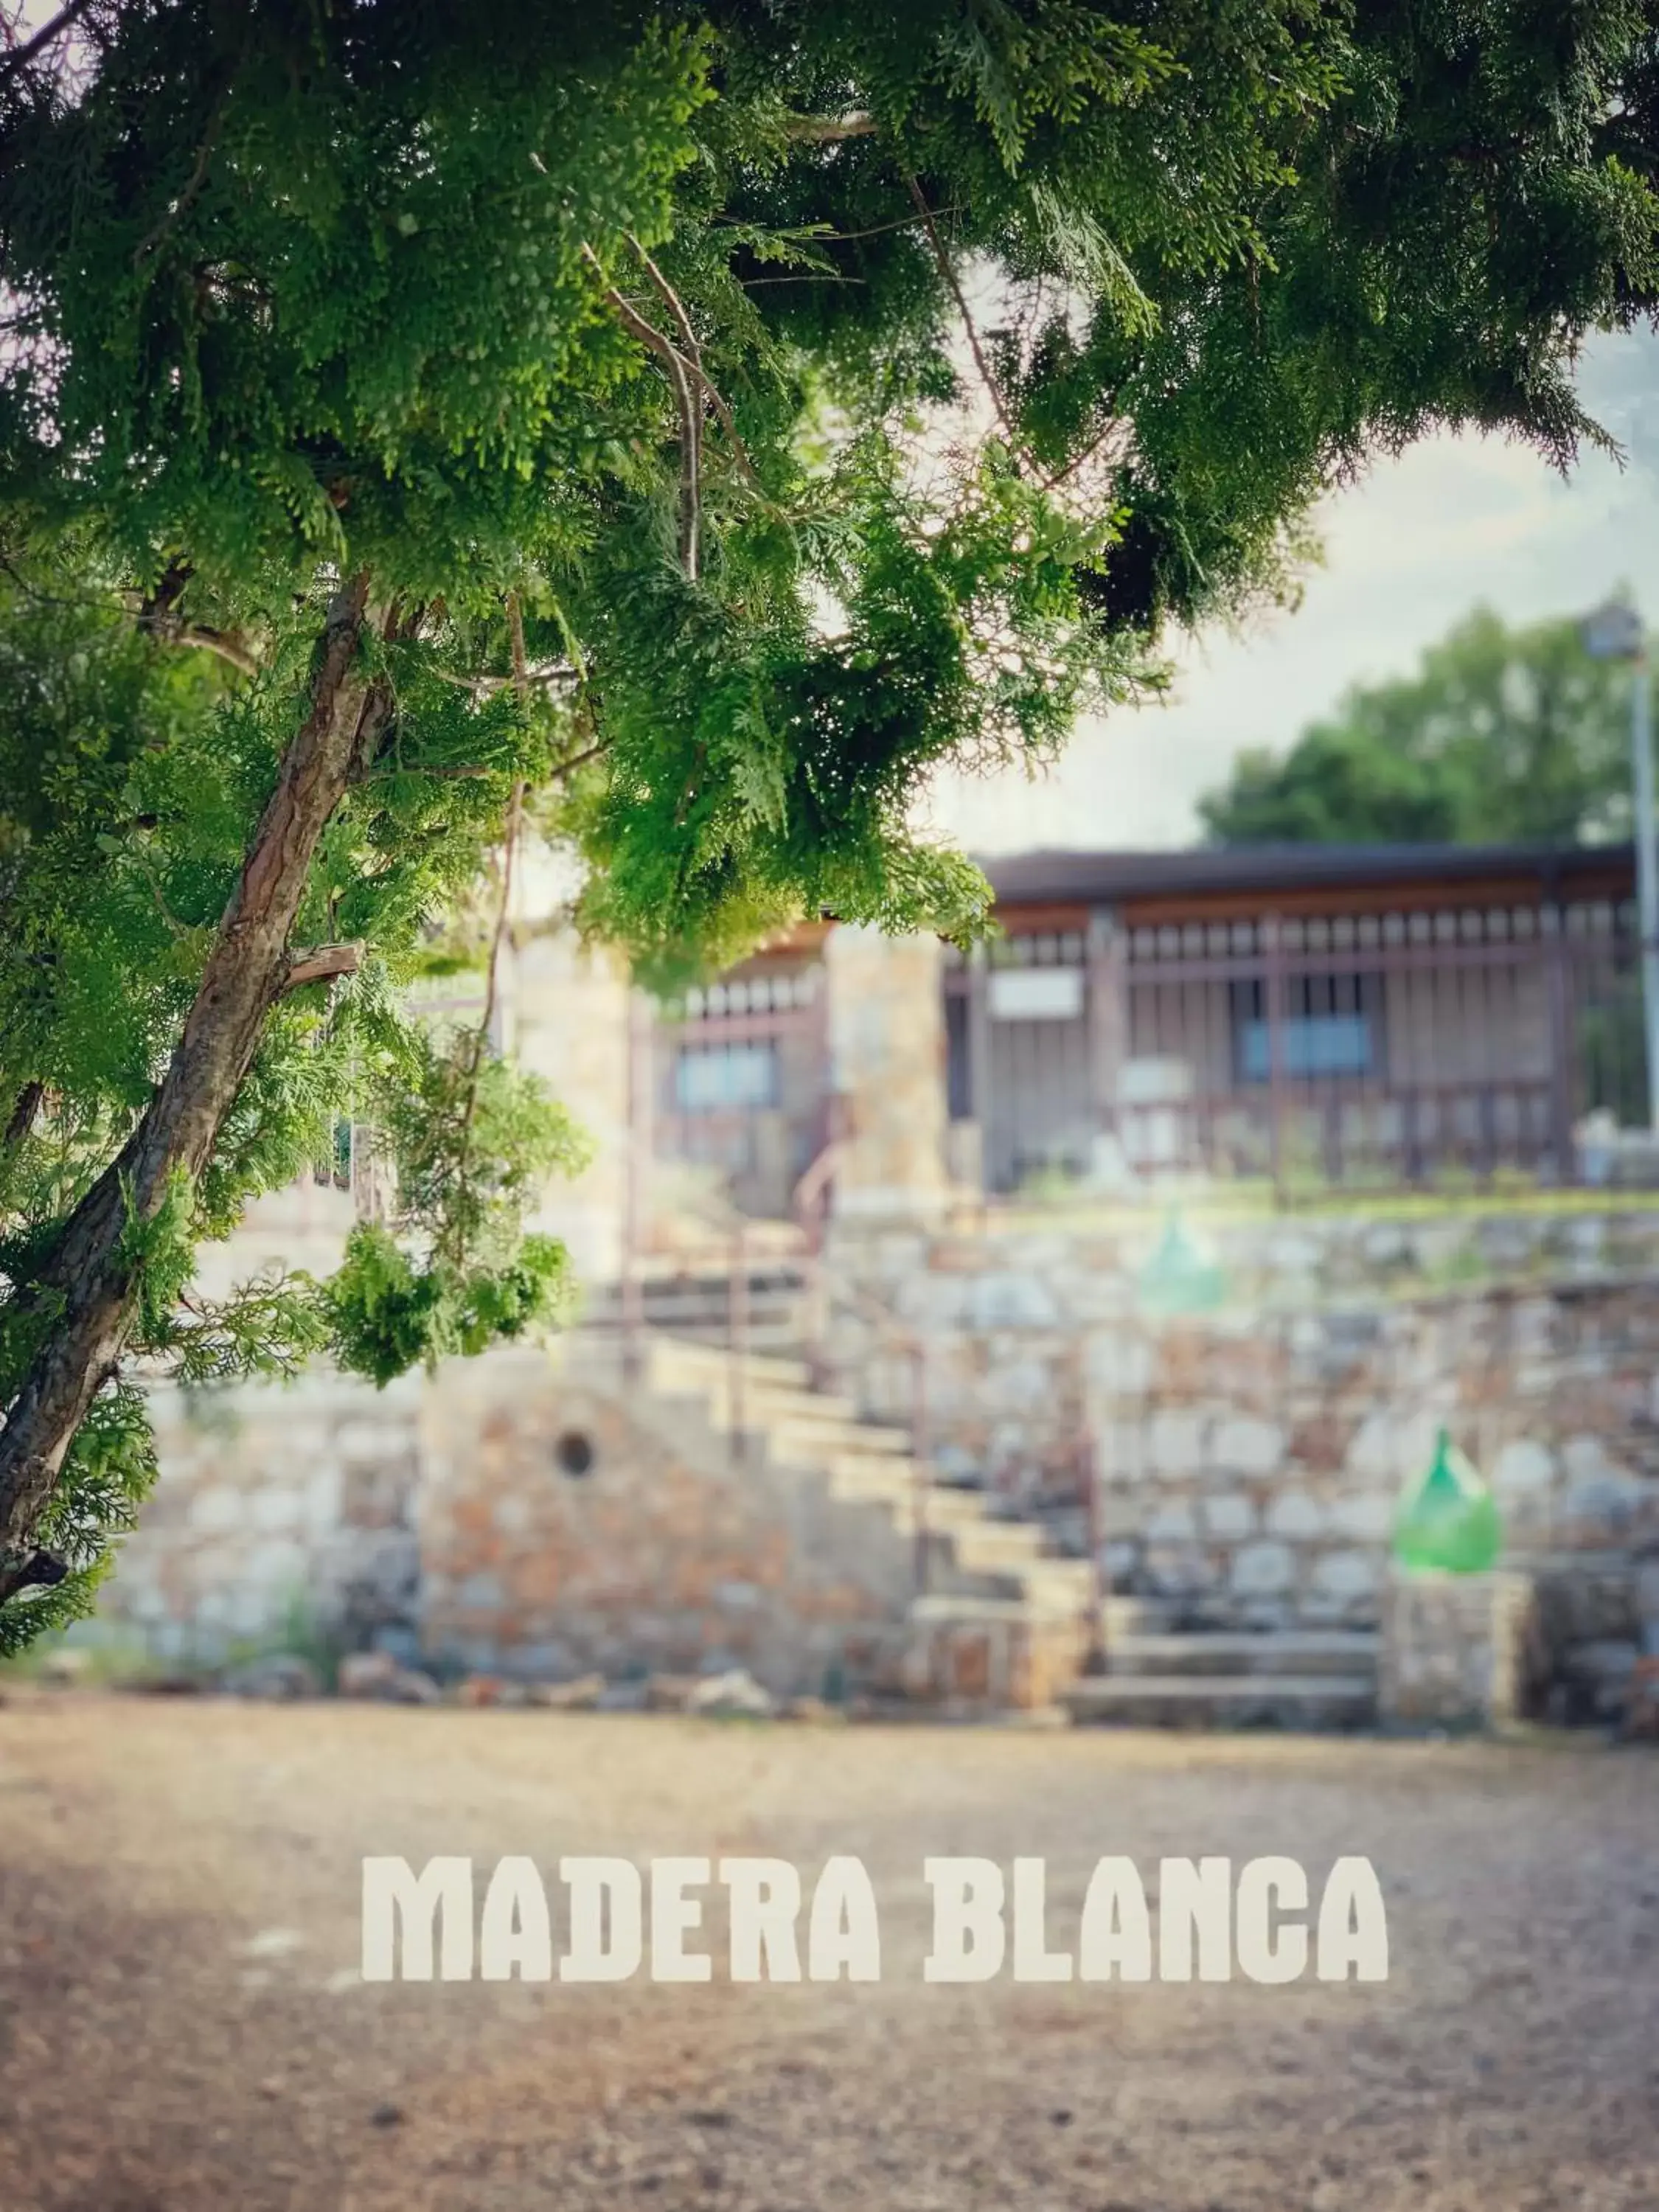 Property Building in Madera Blanca